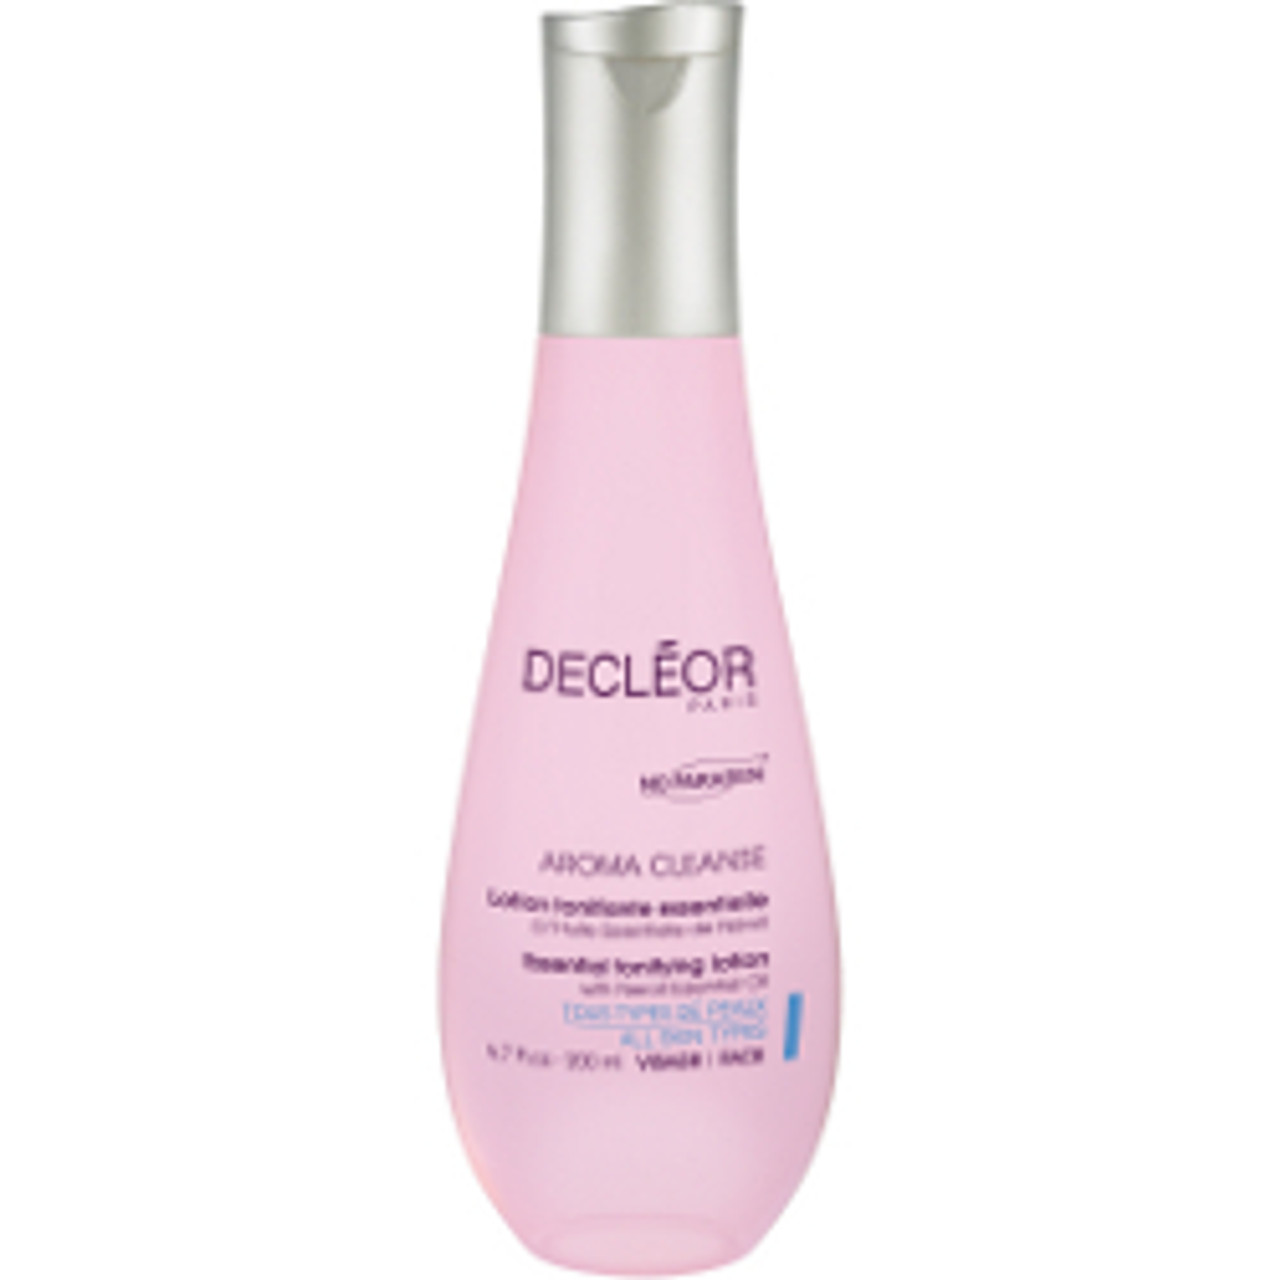 Decleor Aroma Cleanse Essential Tonifying Lotion, 6.7 oz (E1194100)